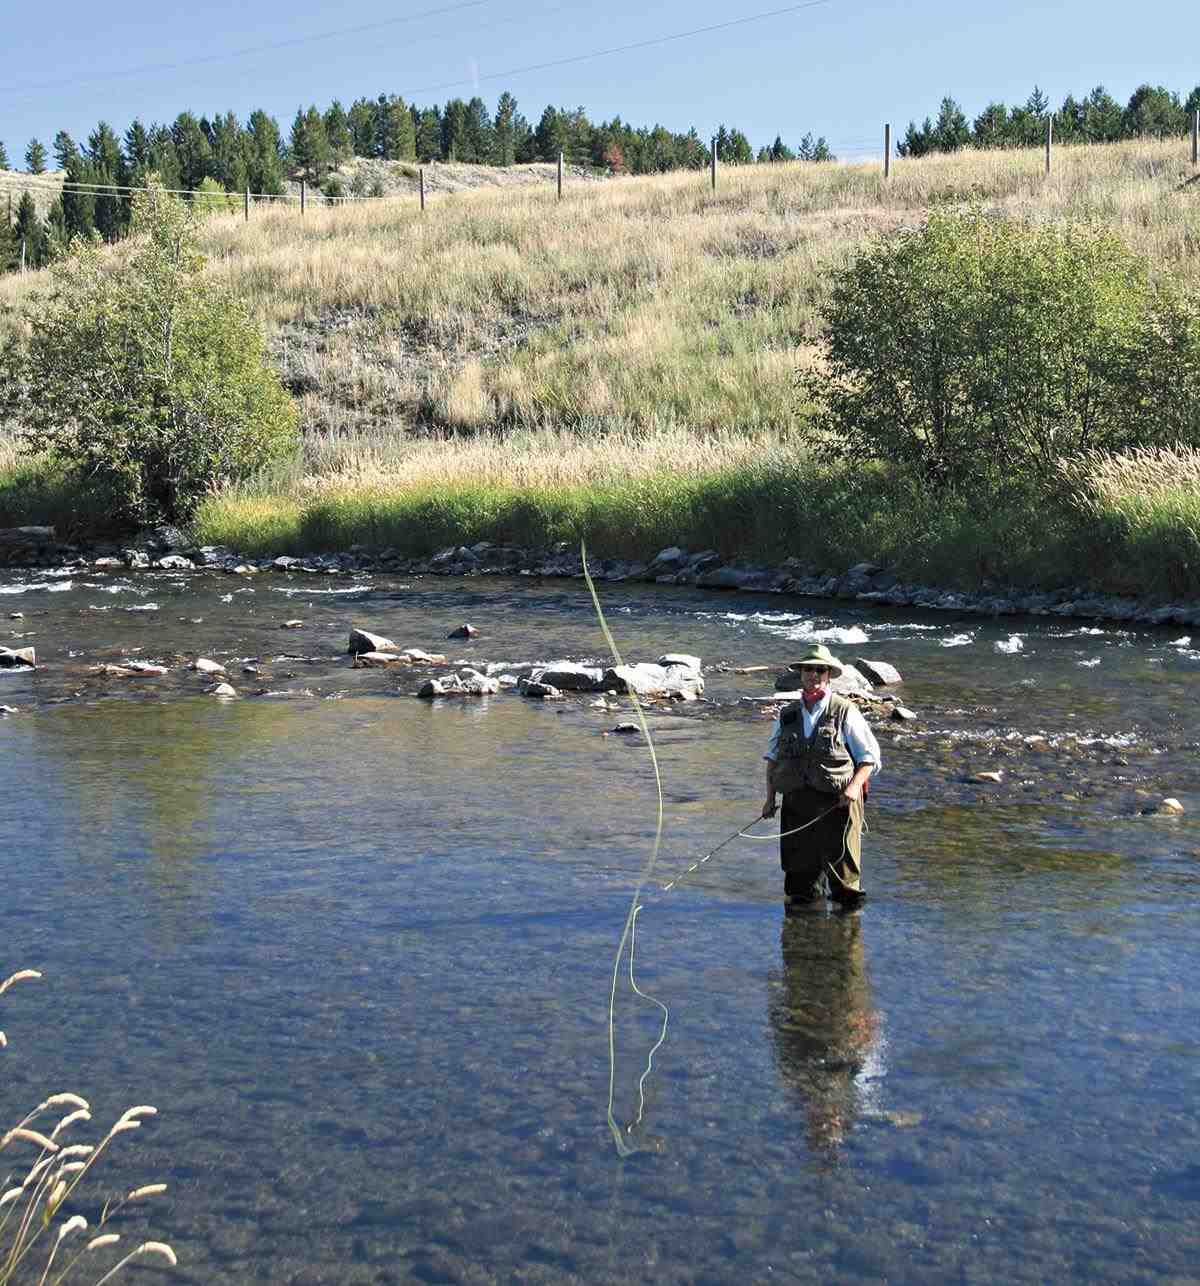 Instructive Steps to Defeat Drag - Fly Fisherman